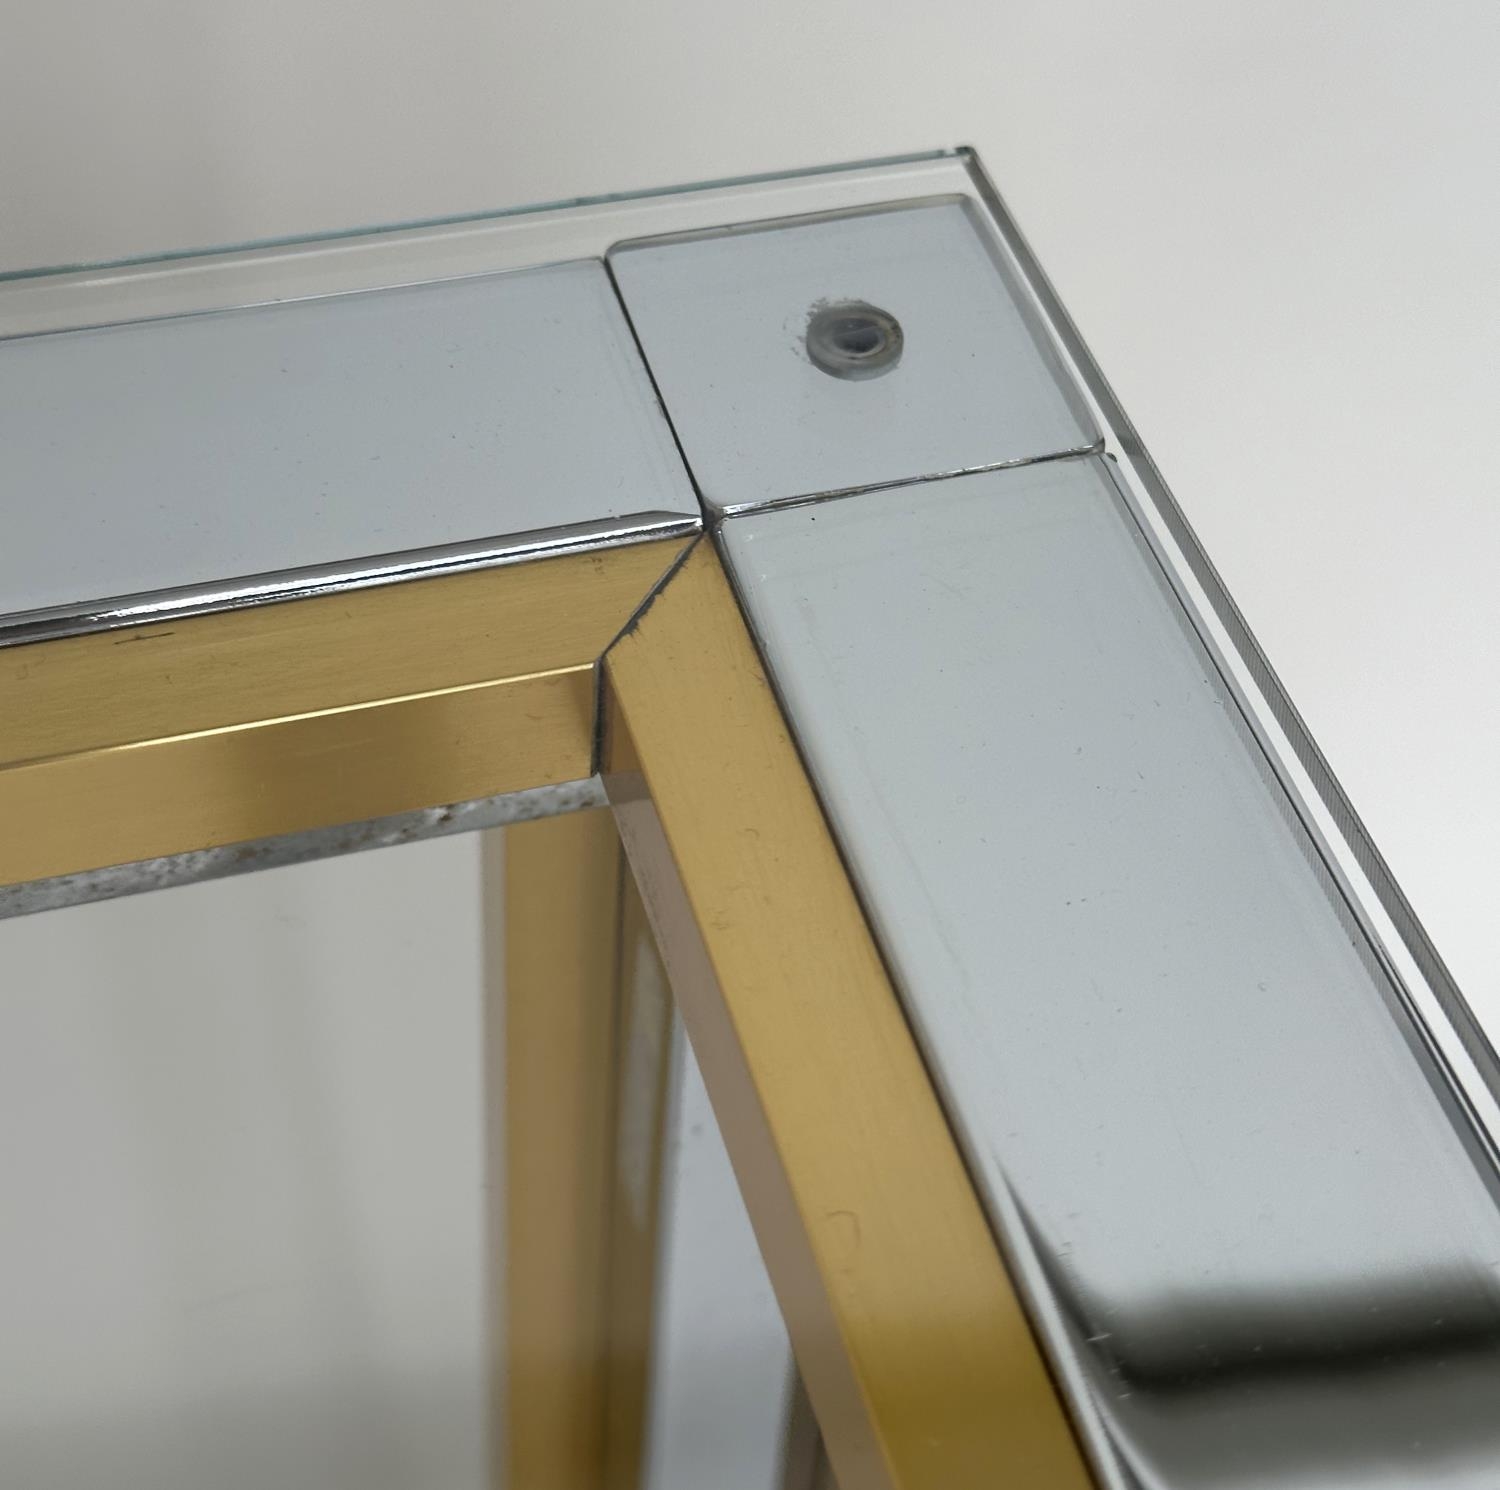 CONSOLE TABLE, 1970s Italian style brass and chrome framed rectangular plate glass, 135cm W x 72cm H - Image 4 of 8